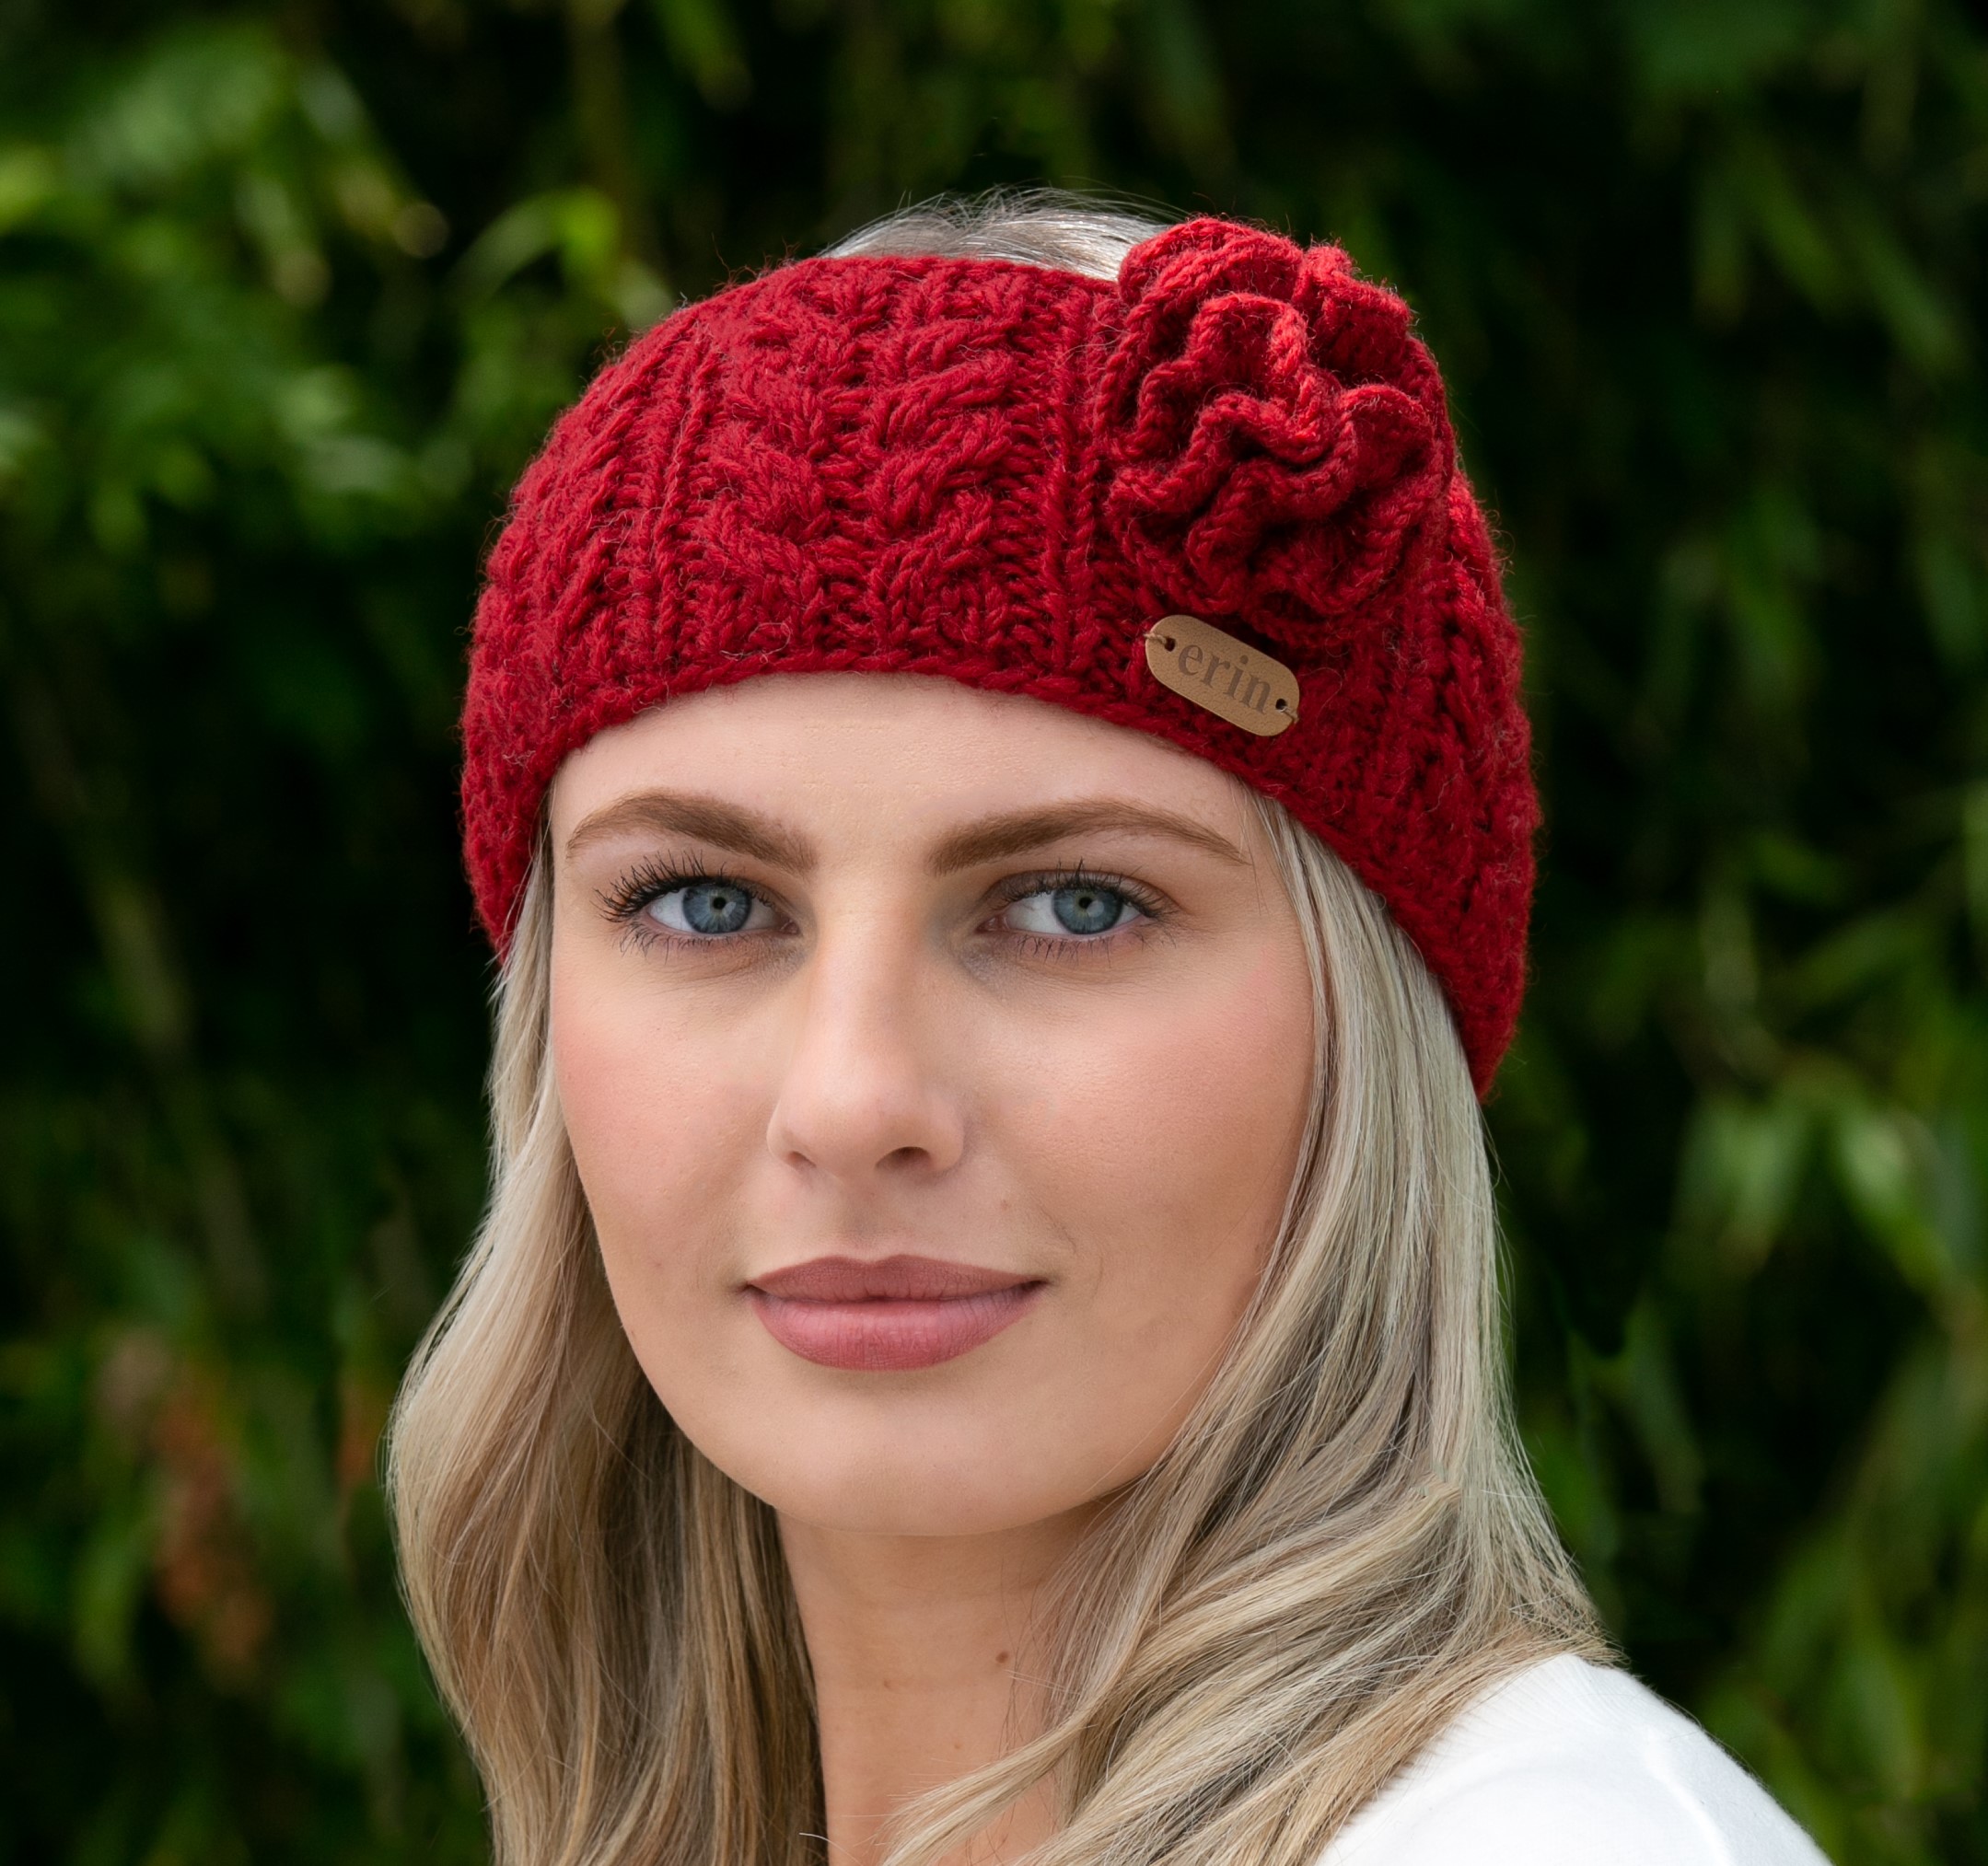 Aran Cable Knitted Wool Headband with Flower Red - Aran Accessories